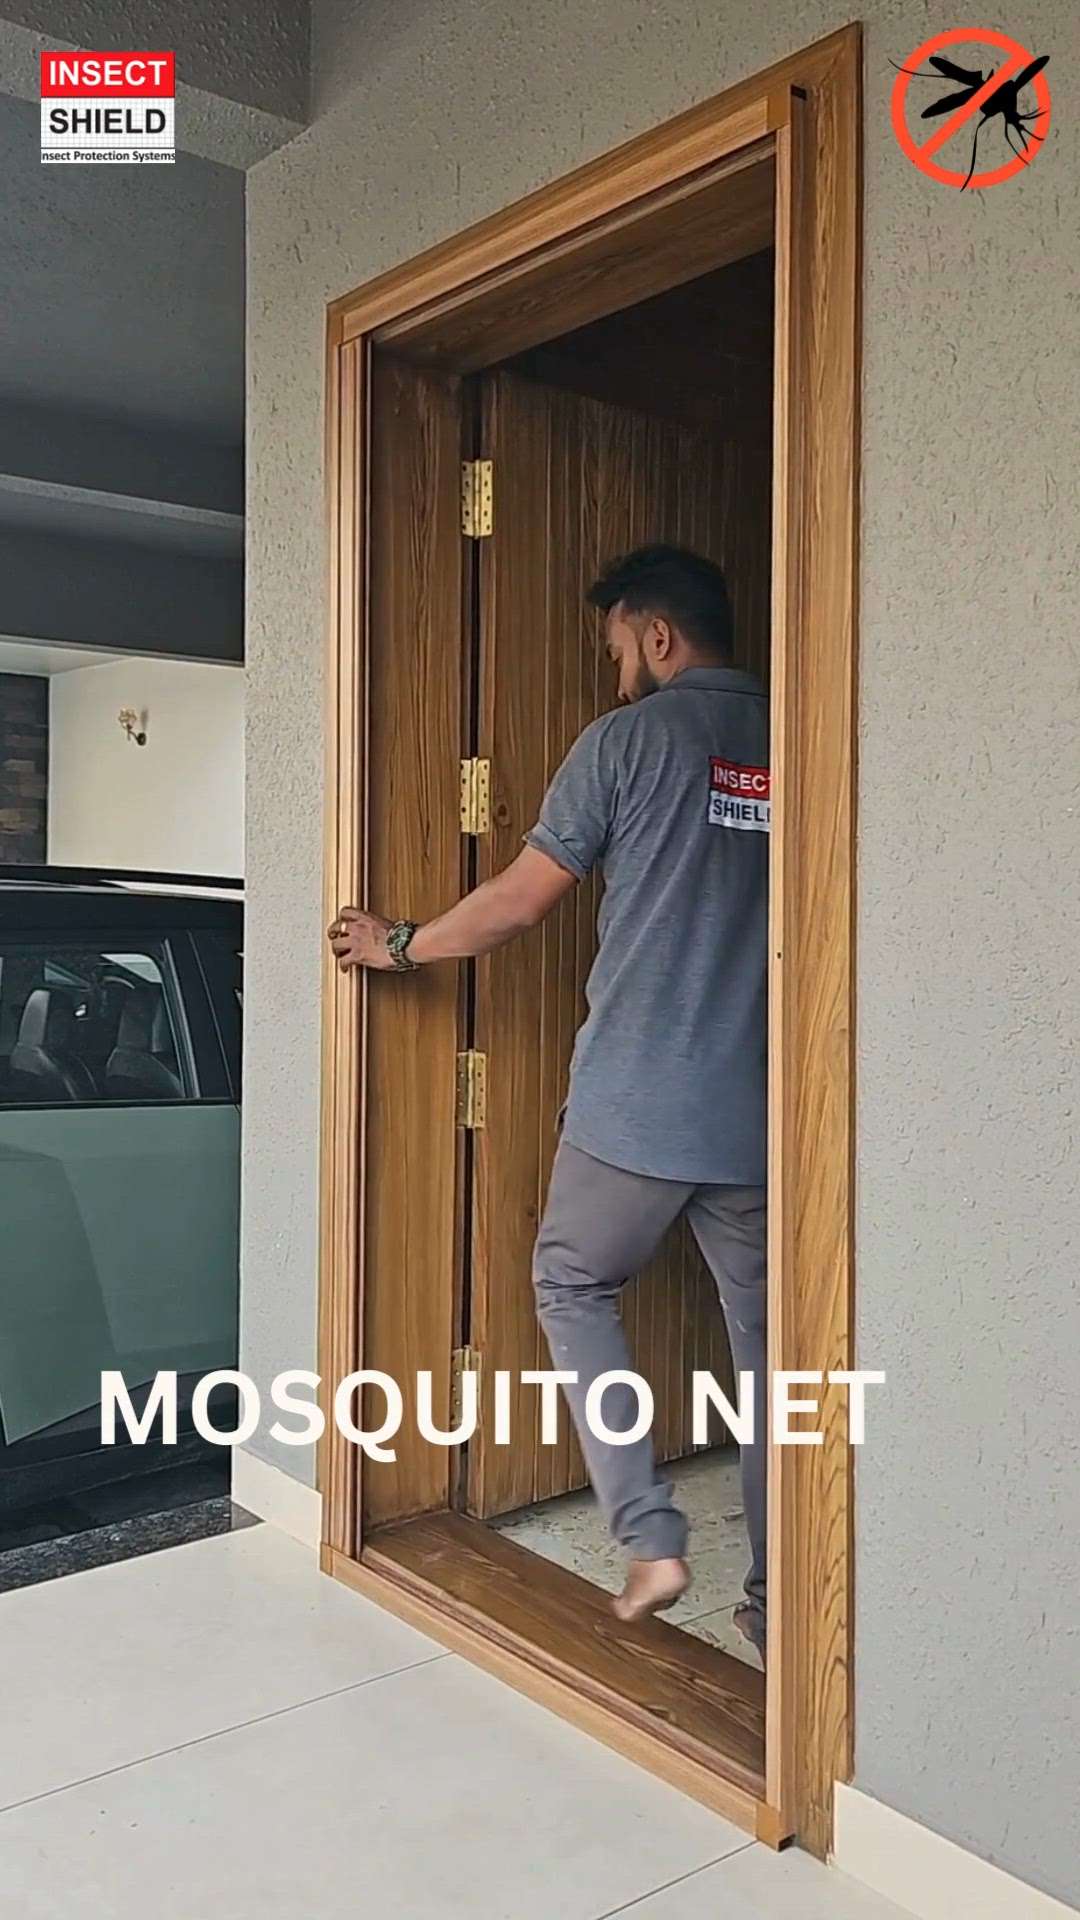 Mosquito net for doors, windows, balconies, air holes, and every opening. Available in many models and is made of quality and durable materials.

Get your MOSQUITO NET now and enjoy a bite-free summer. Protect yourself from pesky bugs with our Mosquito net screens
 #mosquitonet  #mosquitonetdoor  #mosquitonetwindow